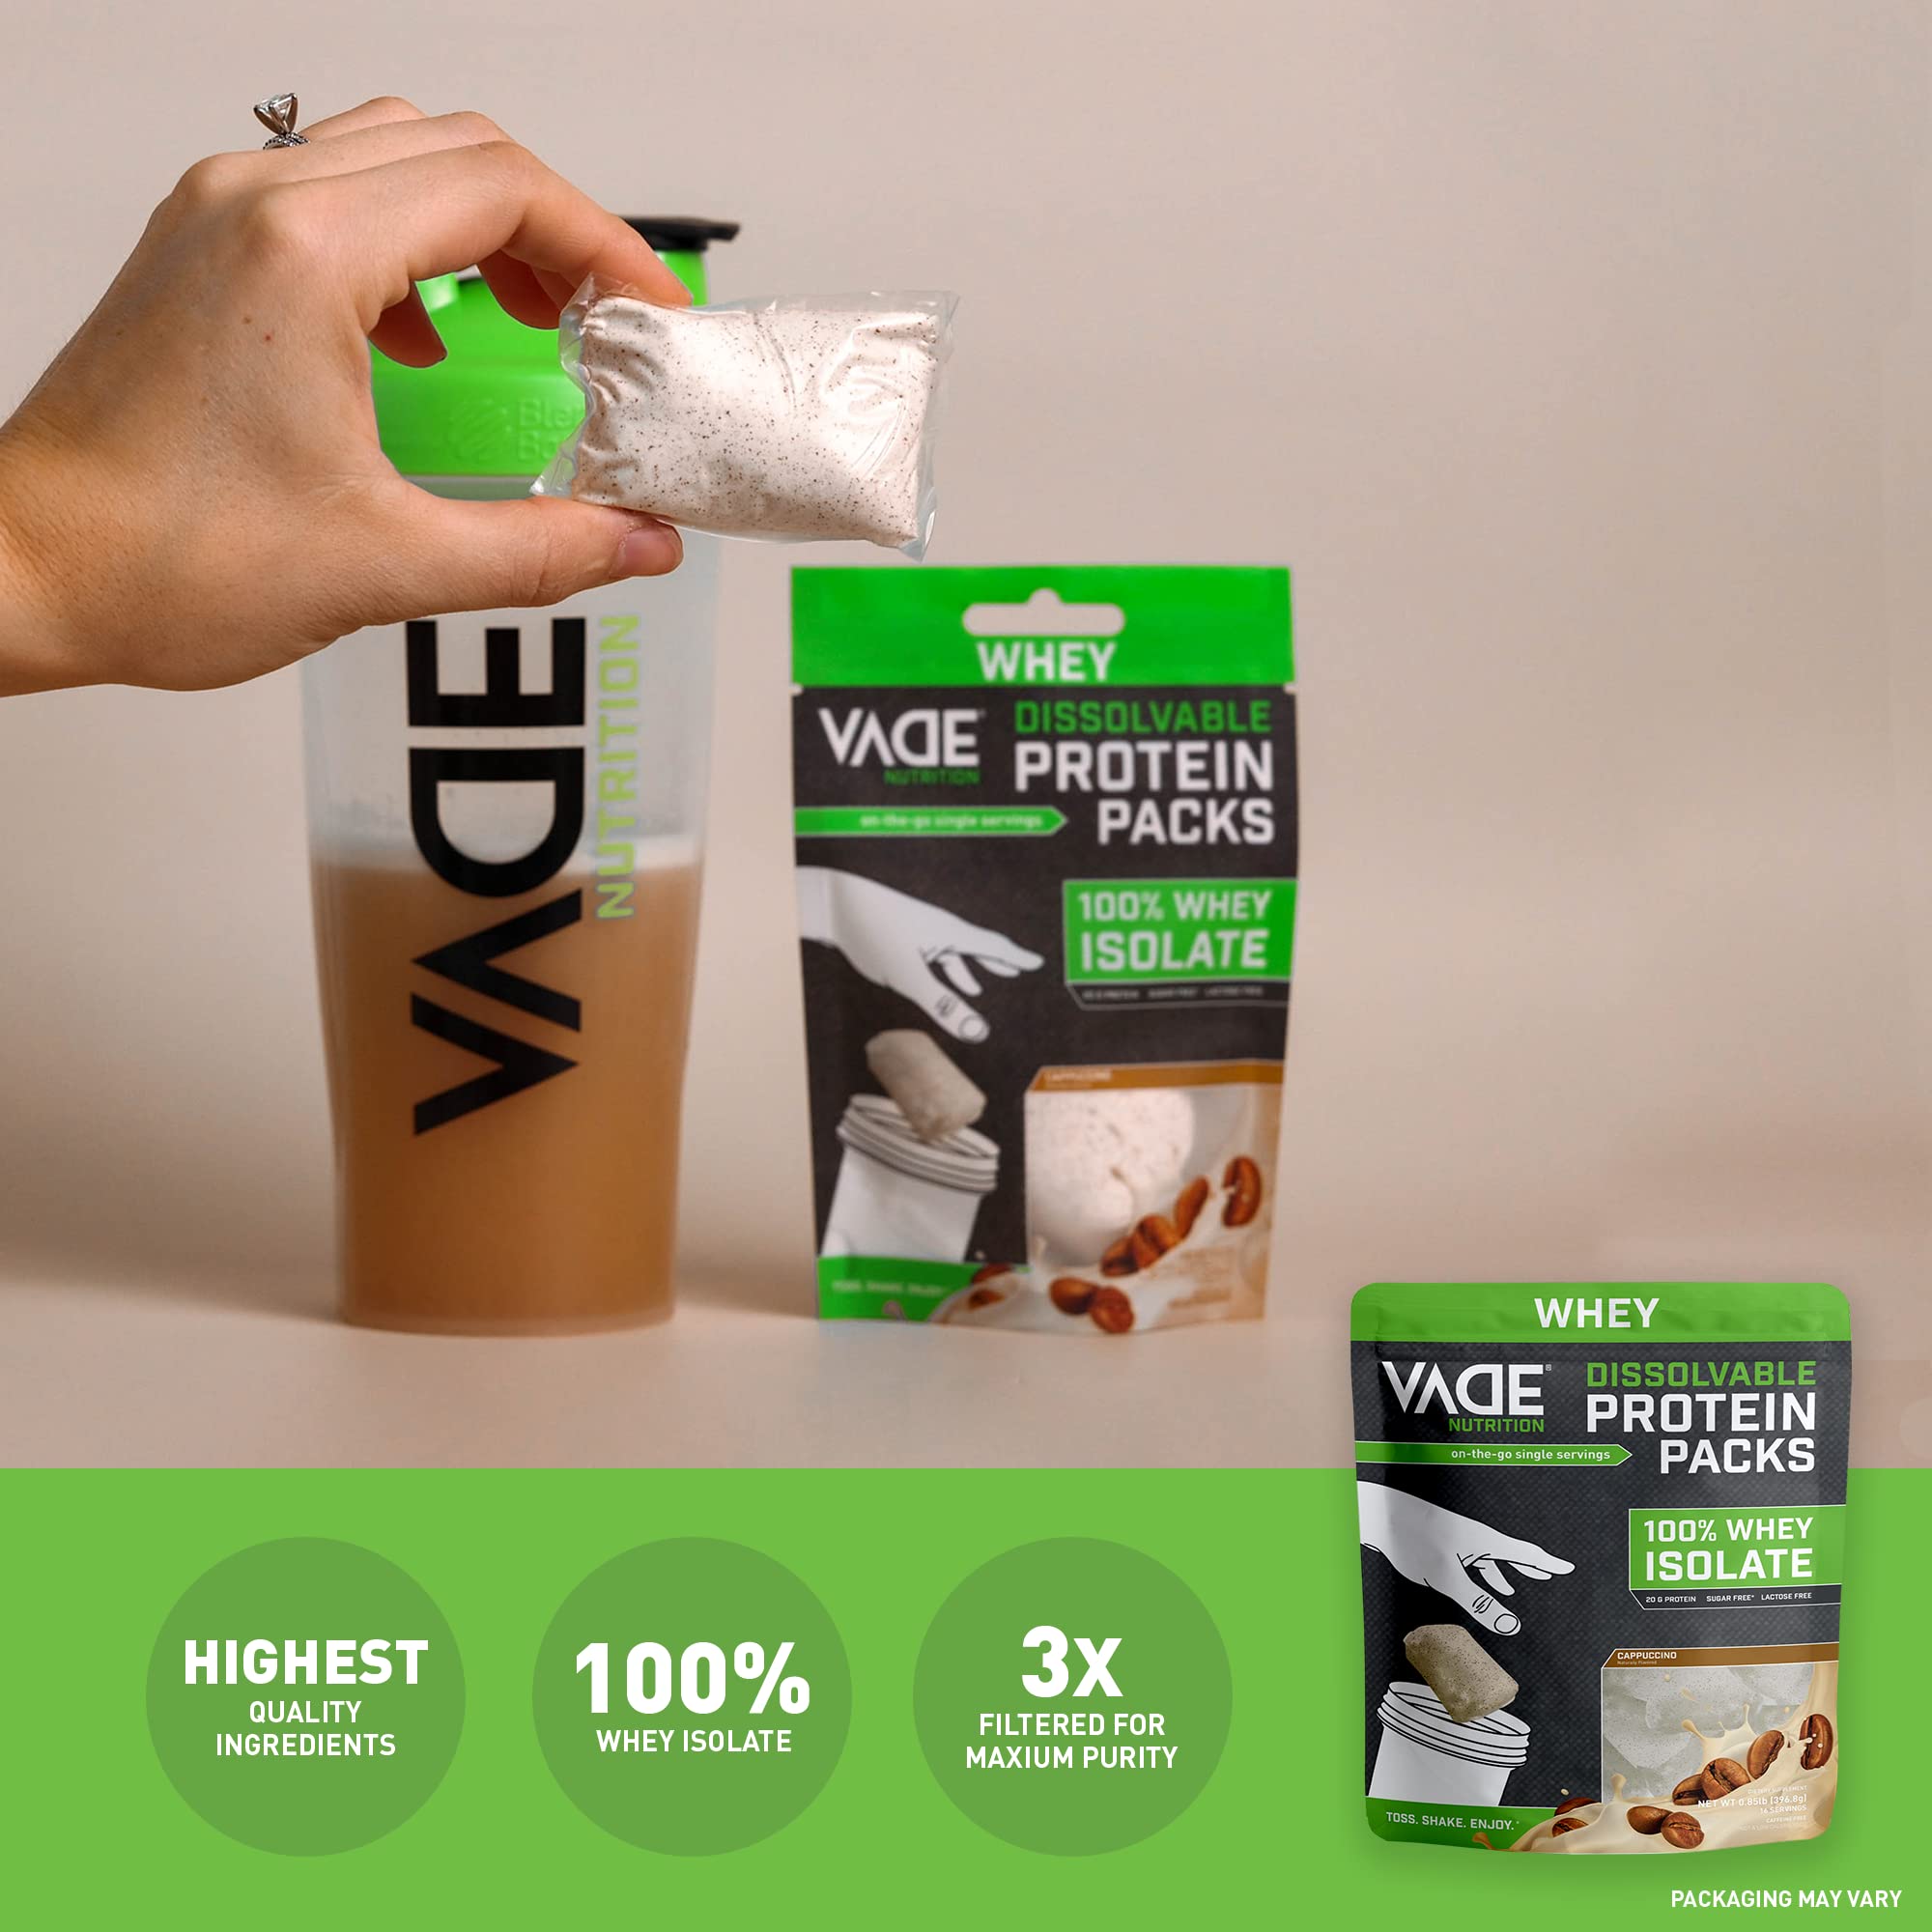 Vade Nutrition Dissolvable Protein Packs | Whey Isolate Protein Powder, On-The-Go, Low Carb, Low Calorie, Lactose Free, Gluten Free, Fat Free, Sugar Free, Lean, Great Tasting (16 Servings, Cappuccino)